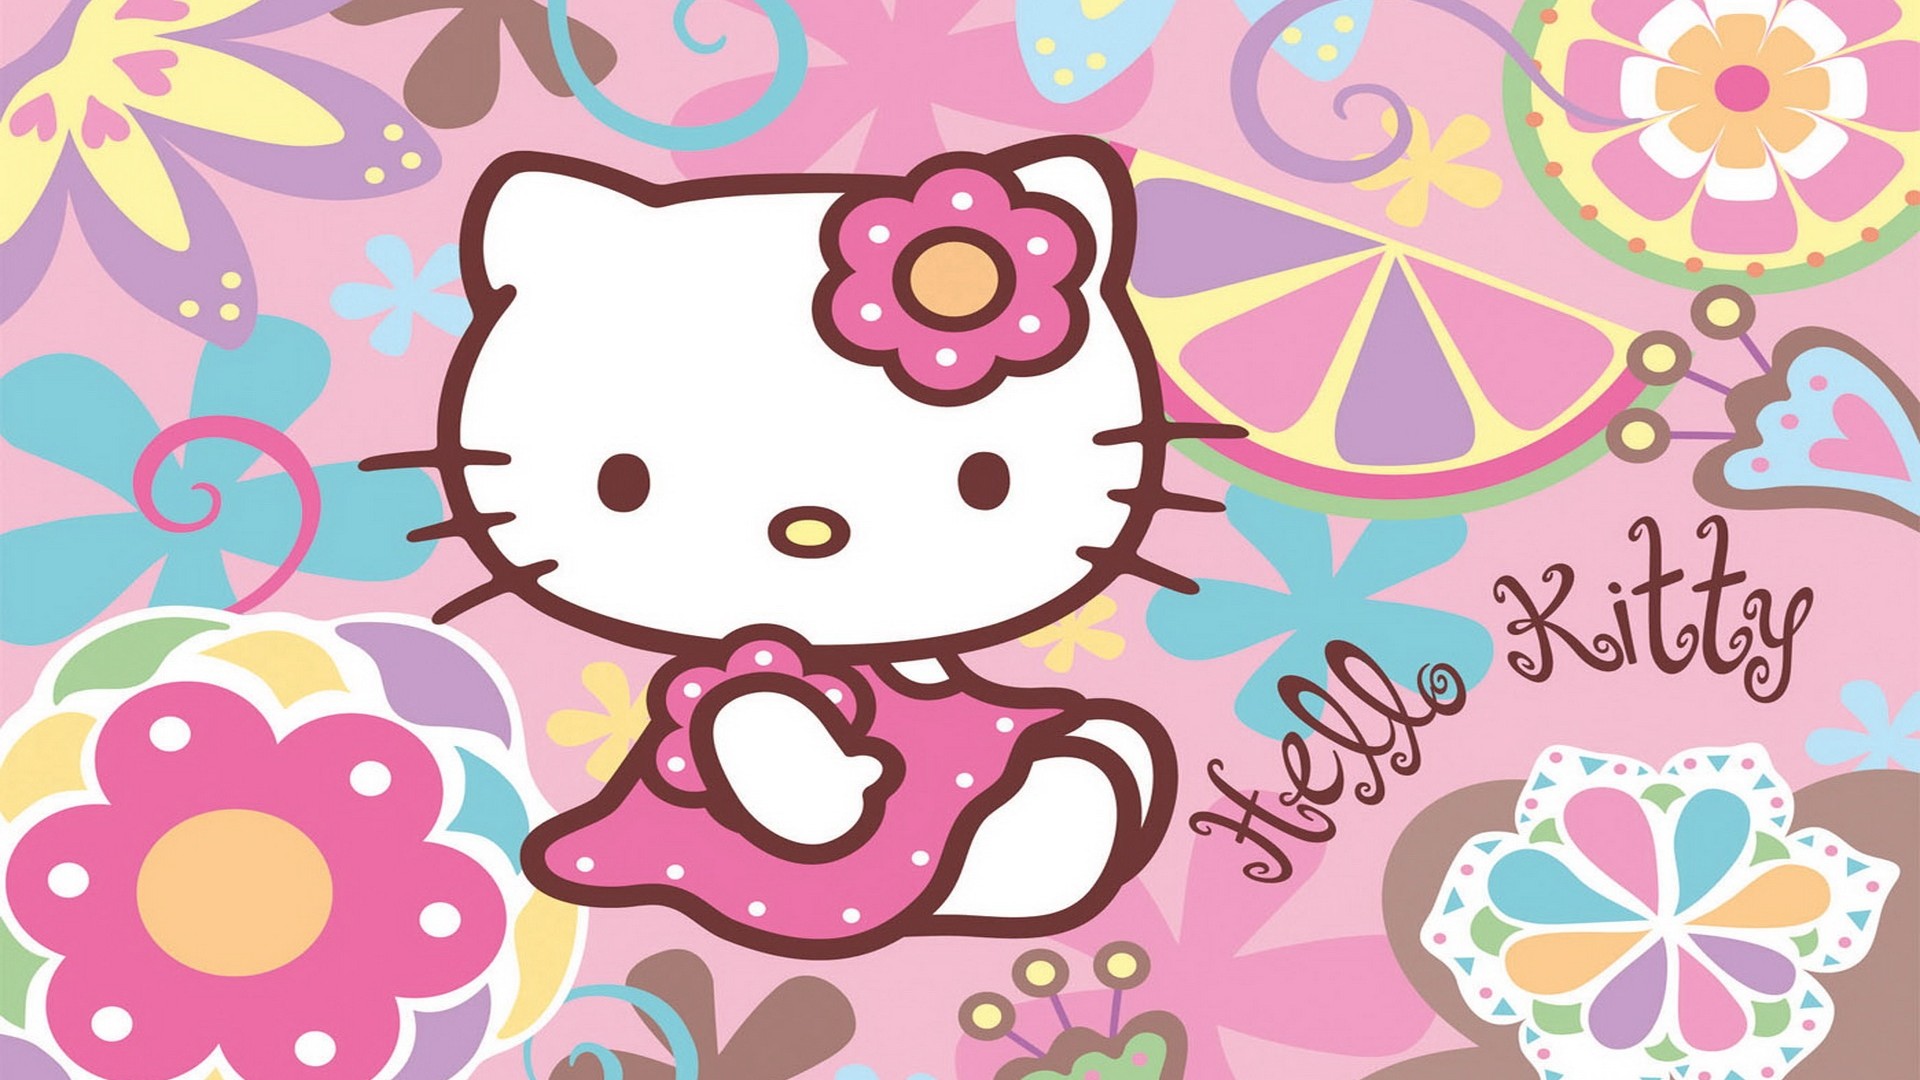 Hello Kitty Wallpaper with resolution 1920X1080 pixel. You can use this wallpaper as background for your desktop Computer Screensavers, Android or iPhone smartphones